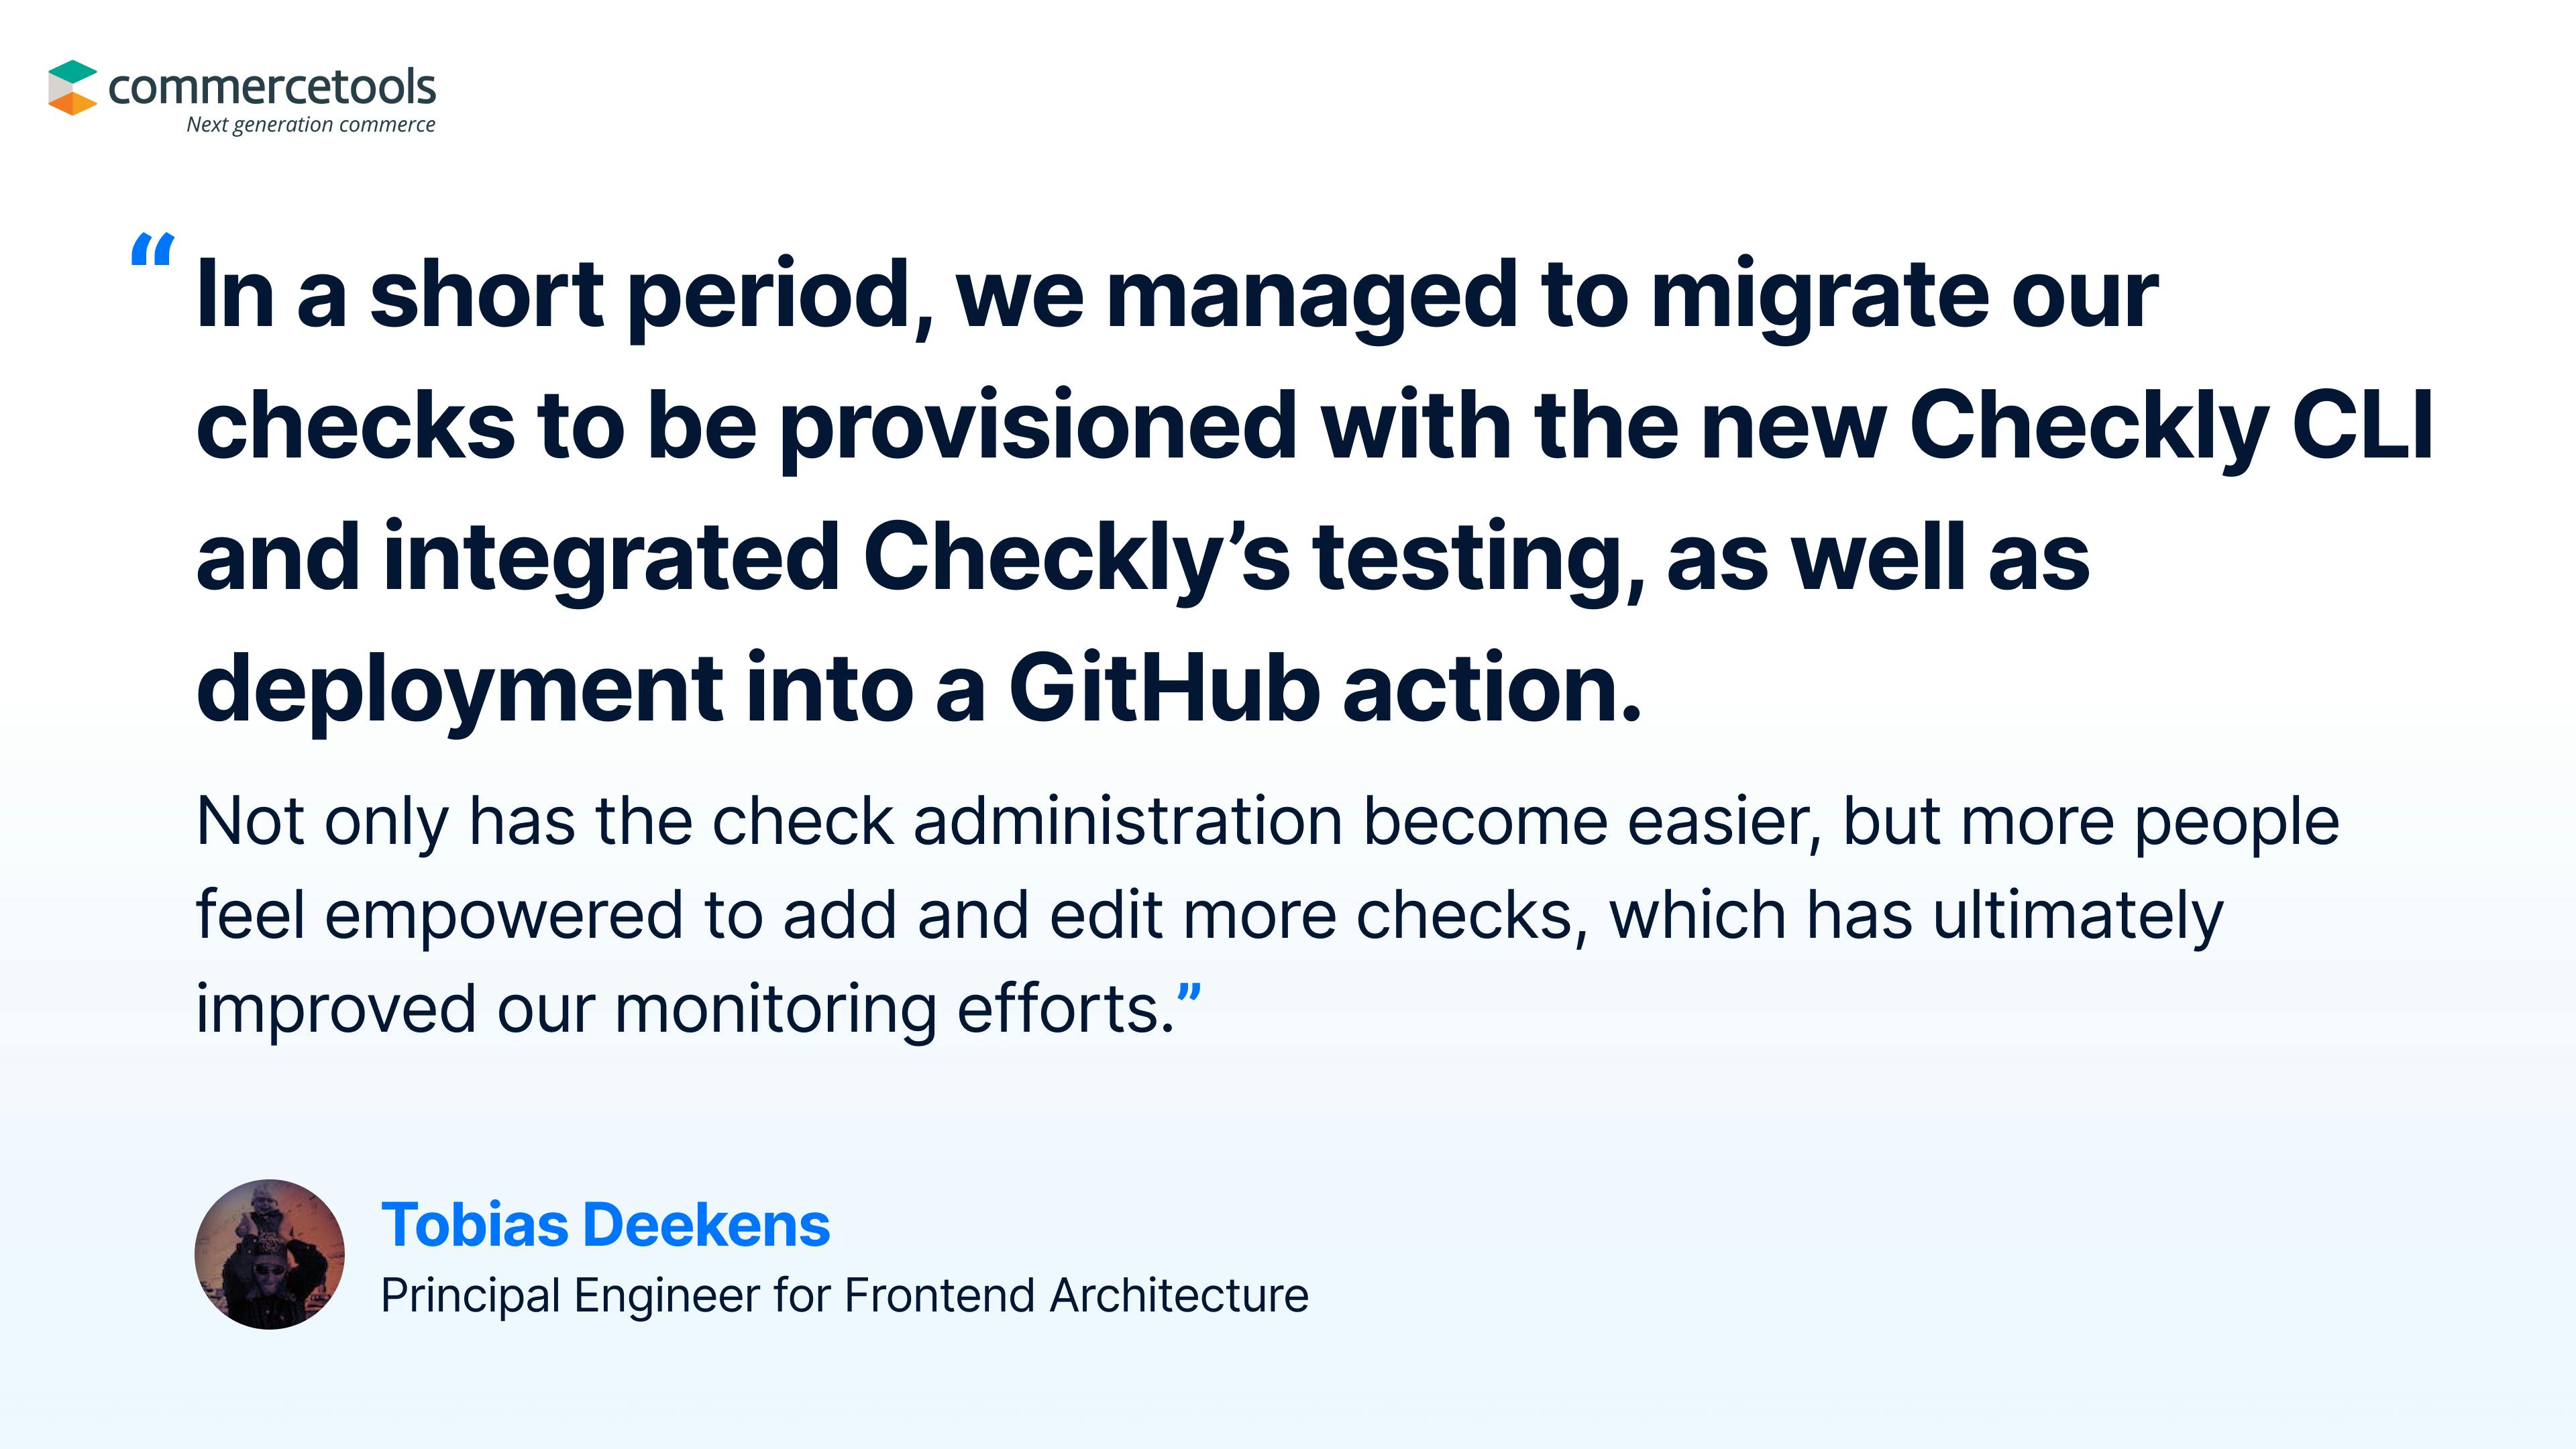 In a short period, we managed to migrate our checks to be provisioned with the new Checkly CLI and integrated Checkly's testing, as well as deployment into a GitHub action.